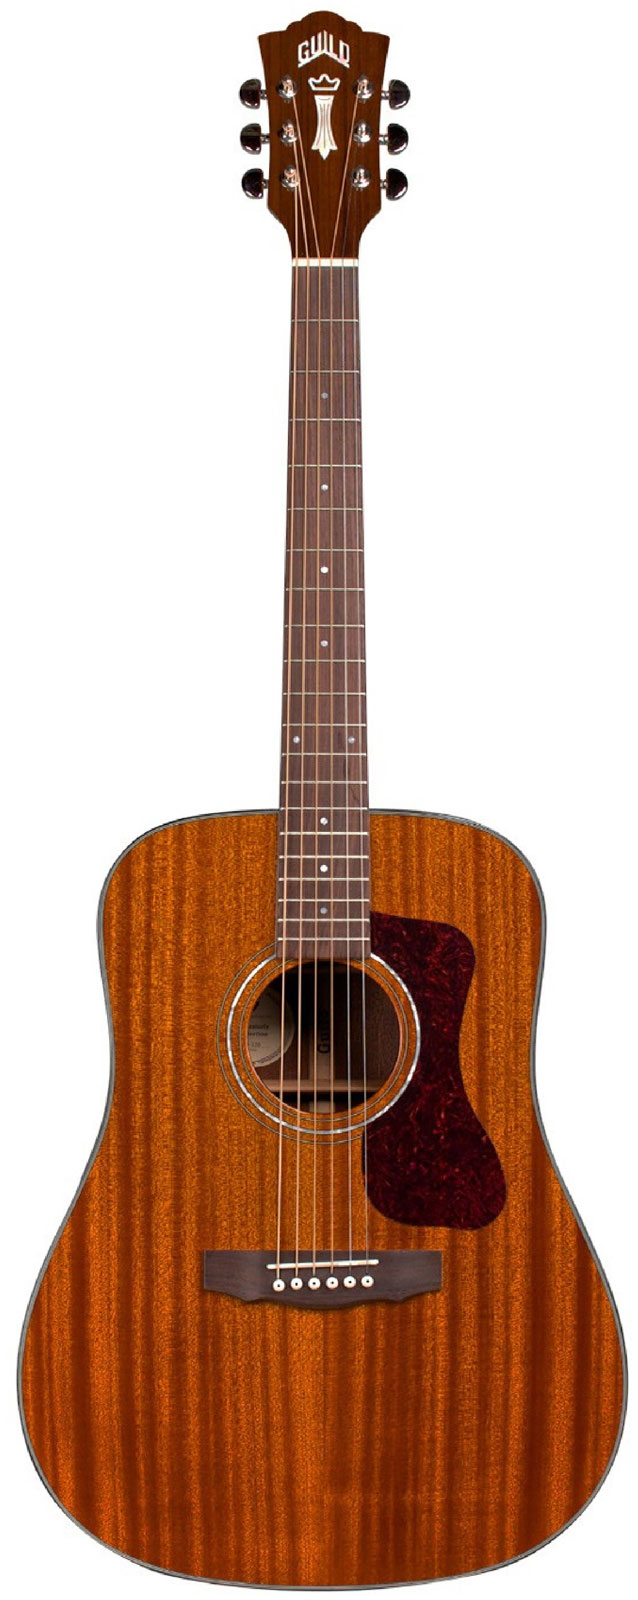 GUILD WESTERLY D-120 NATURAL